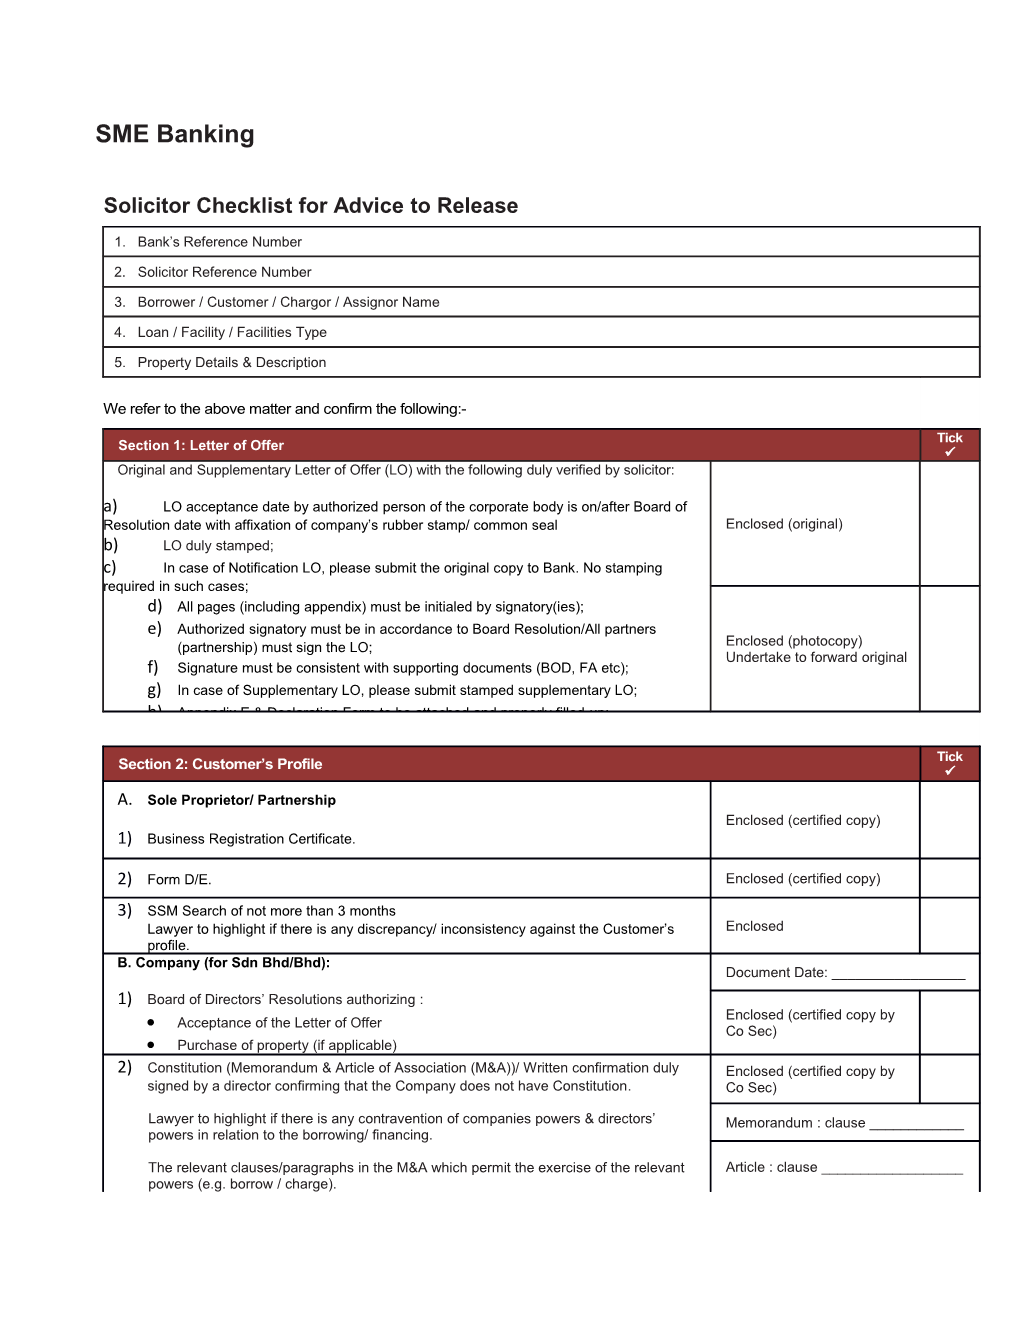 Solicitor Checklist for Advice to Release